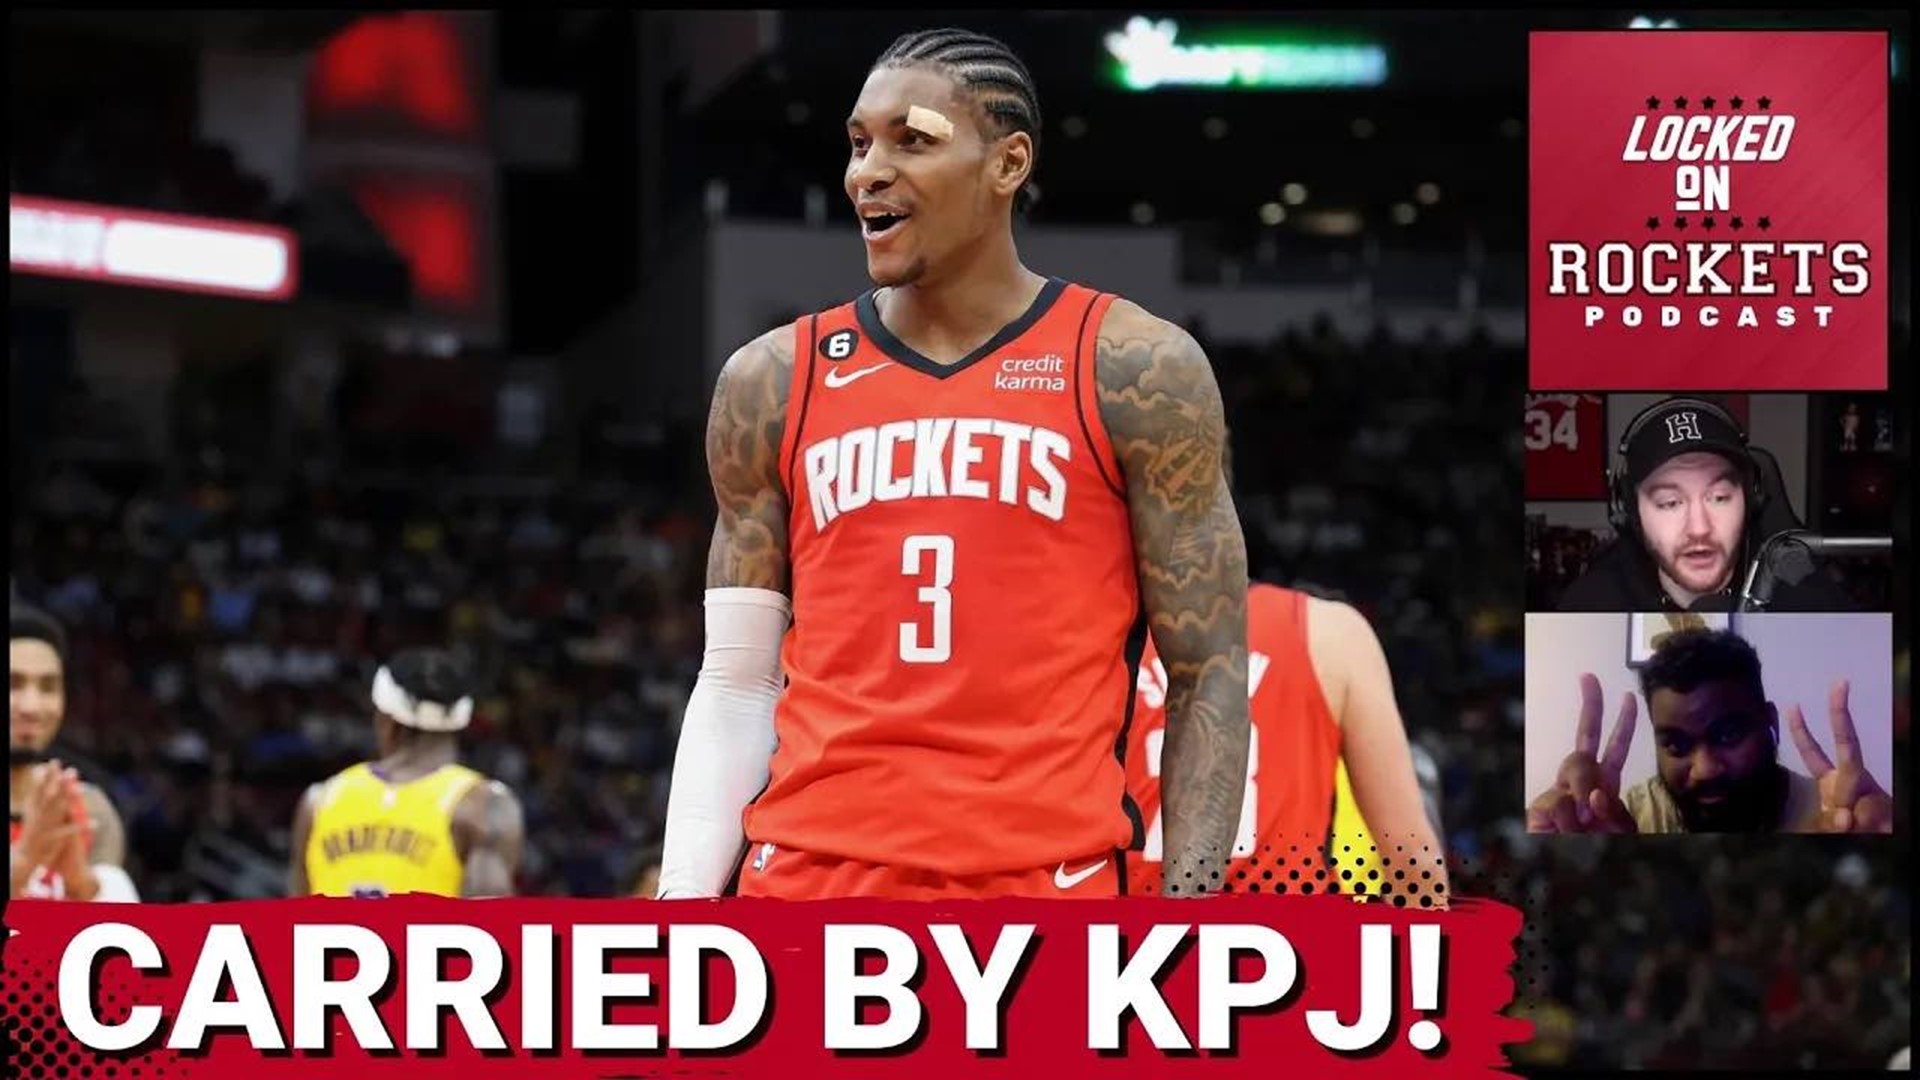 Host Jackson Gatlin is joined by Madison Moore to discuss Kevin Porter Jr. carrying the Houston Rockets to their 104-94 win against the Los Angeles Lakers.